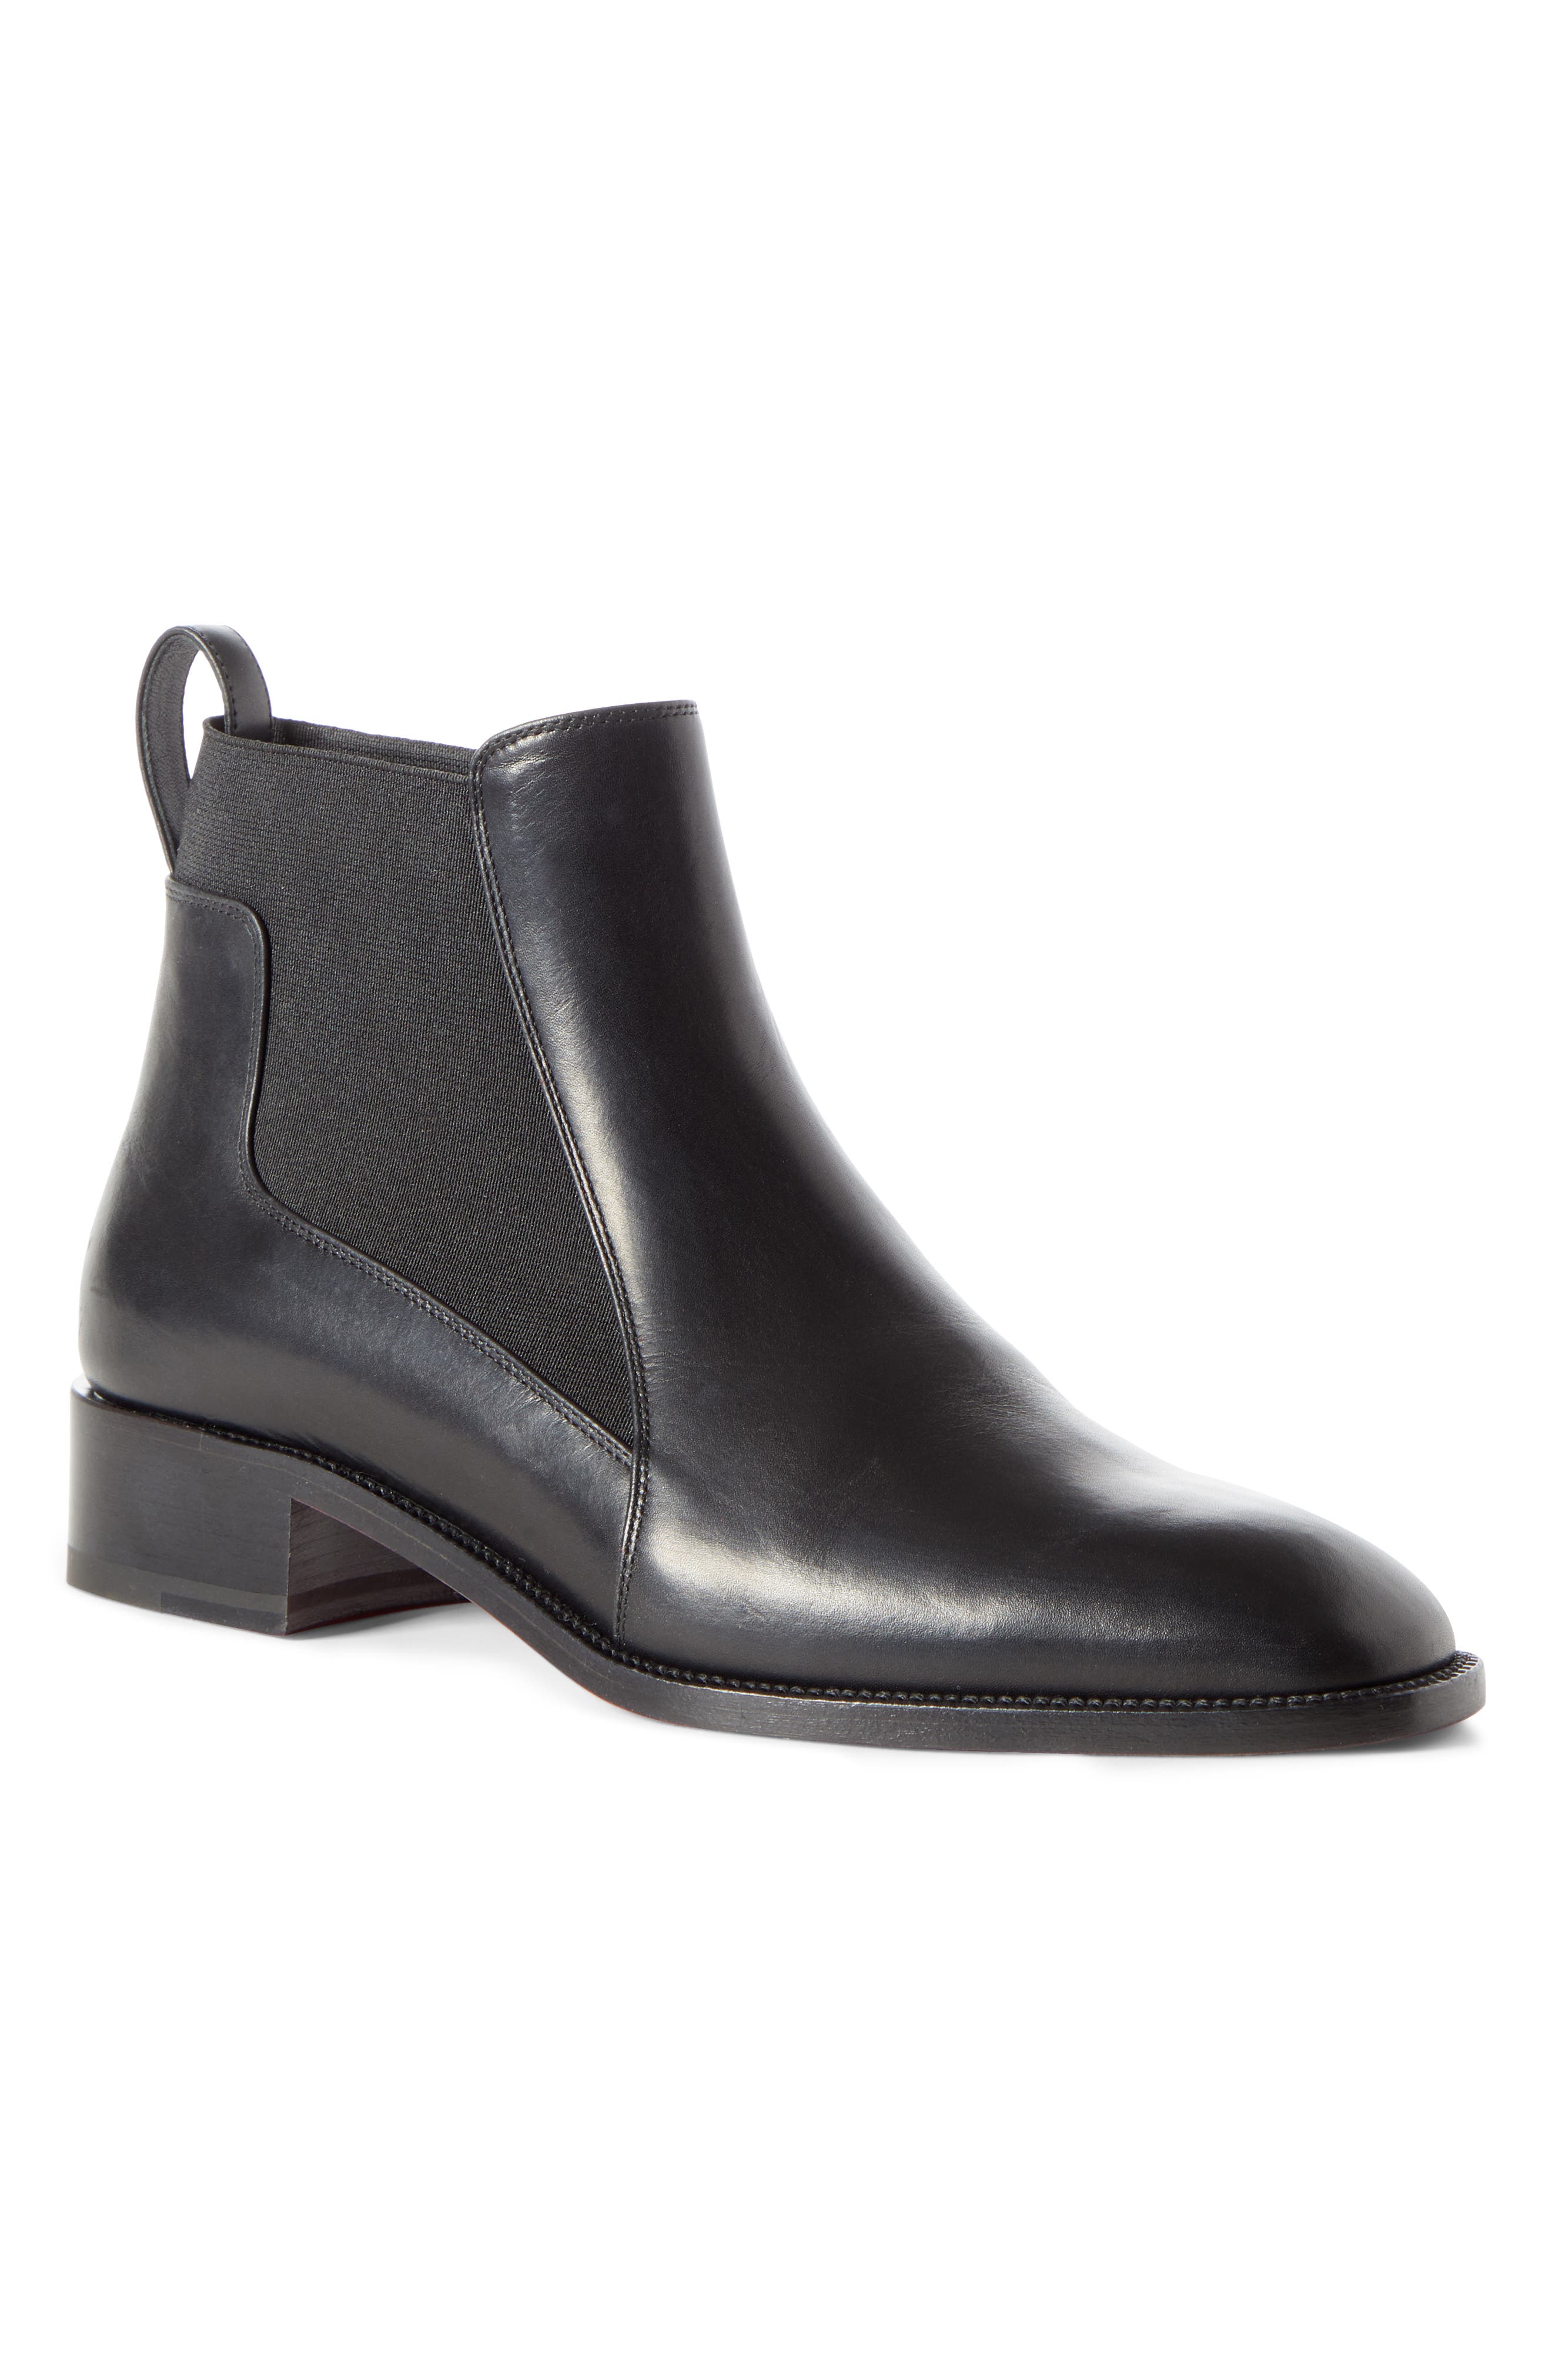 louboutin chelsea boots womens